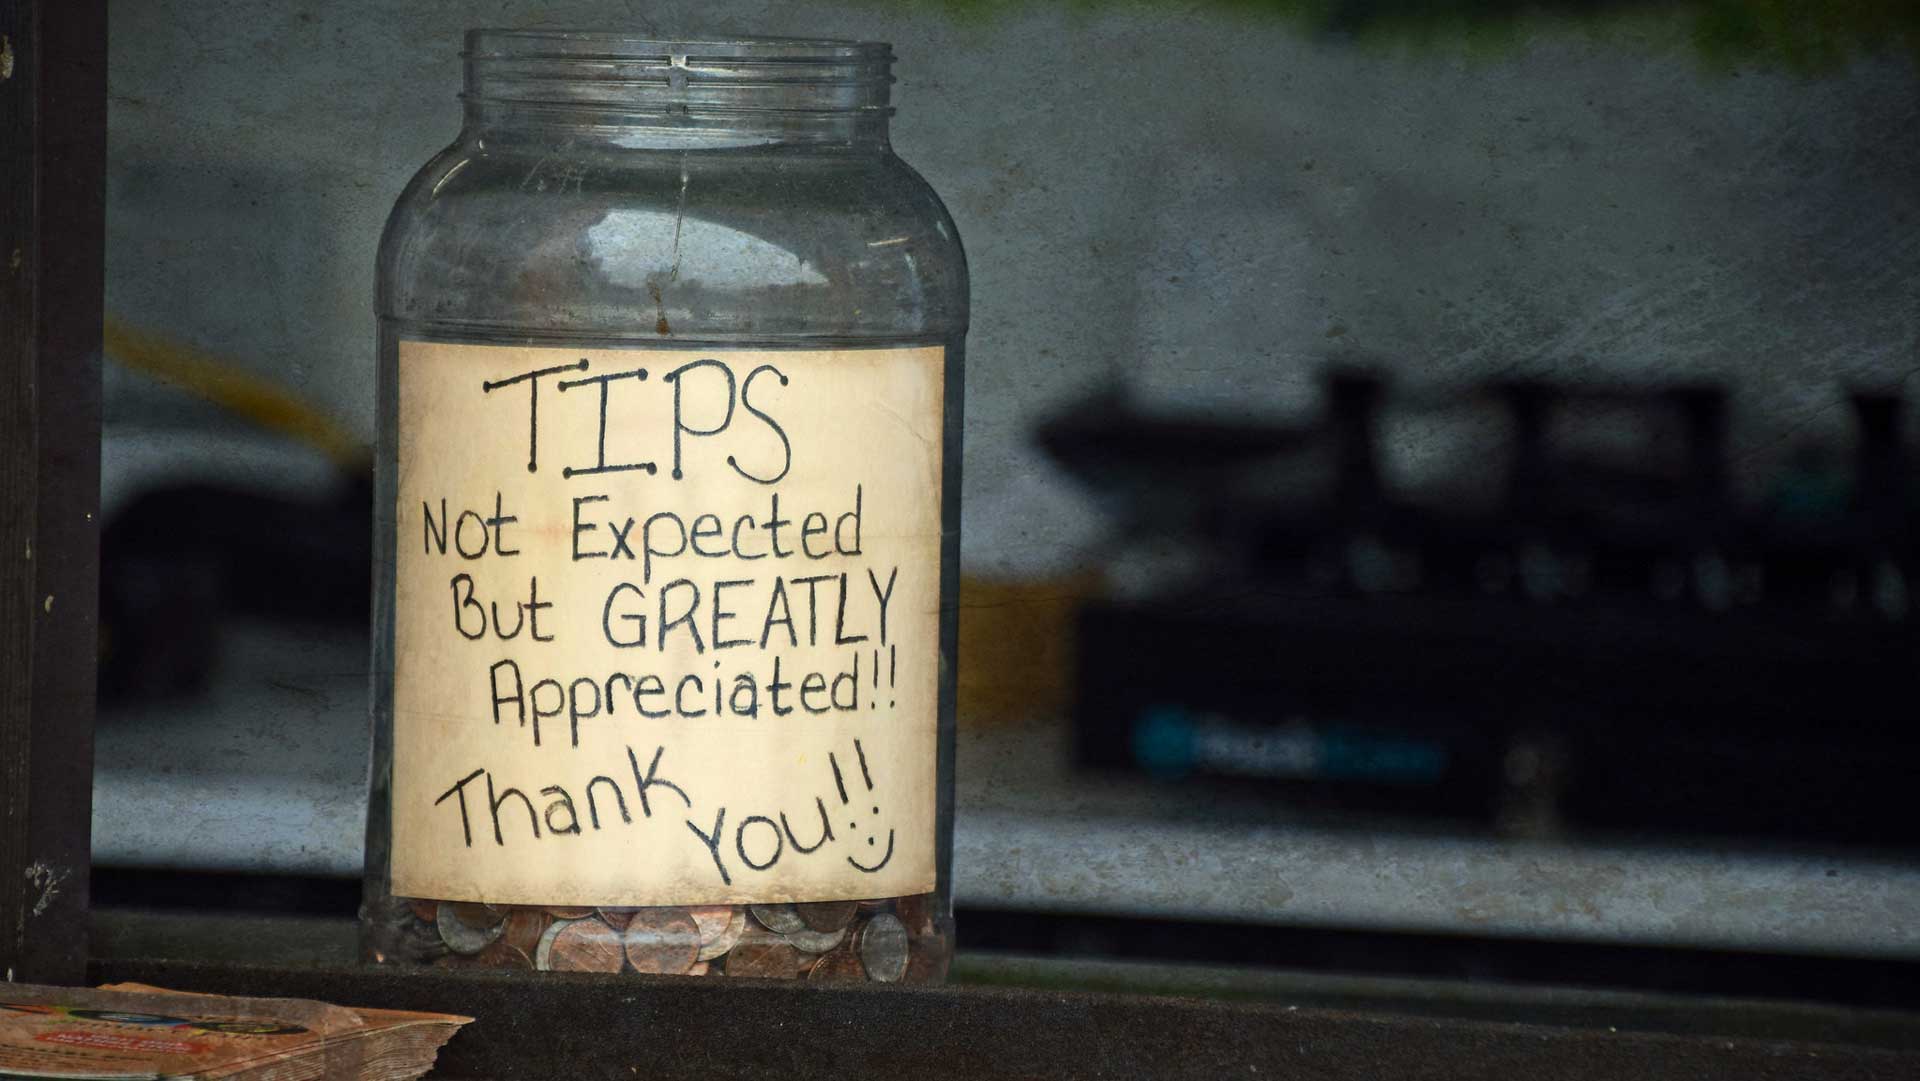 According to a 2023 Pew Research survey, tipping expectations have grown over the past few years.